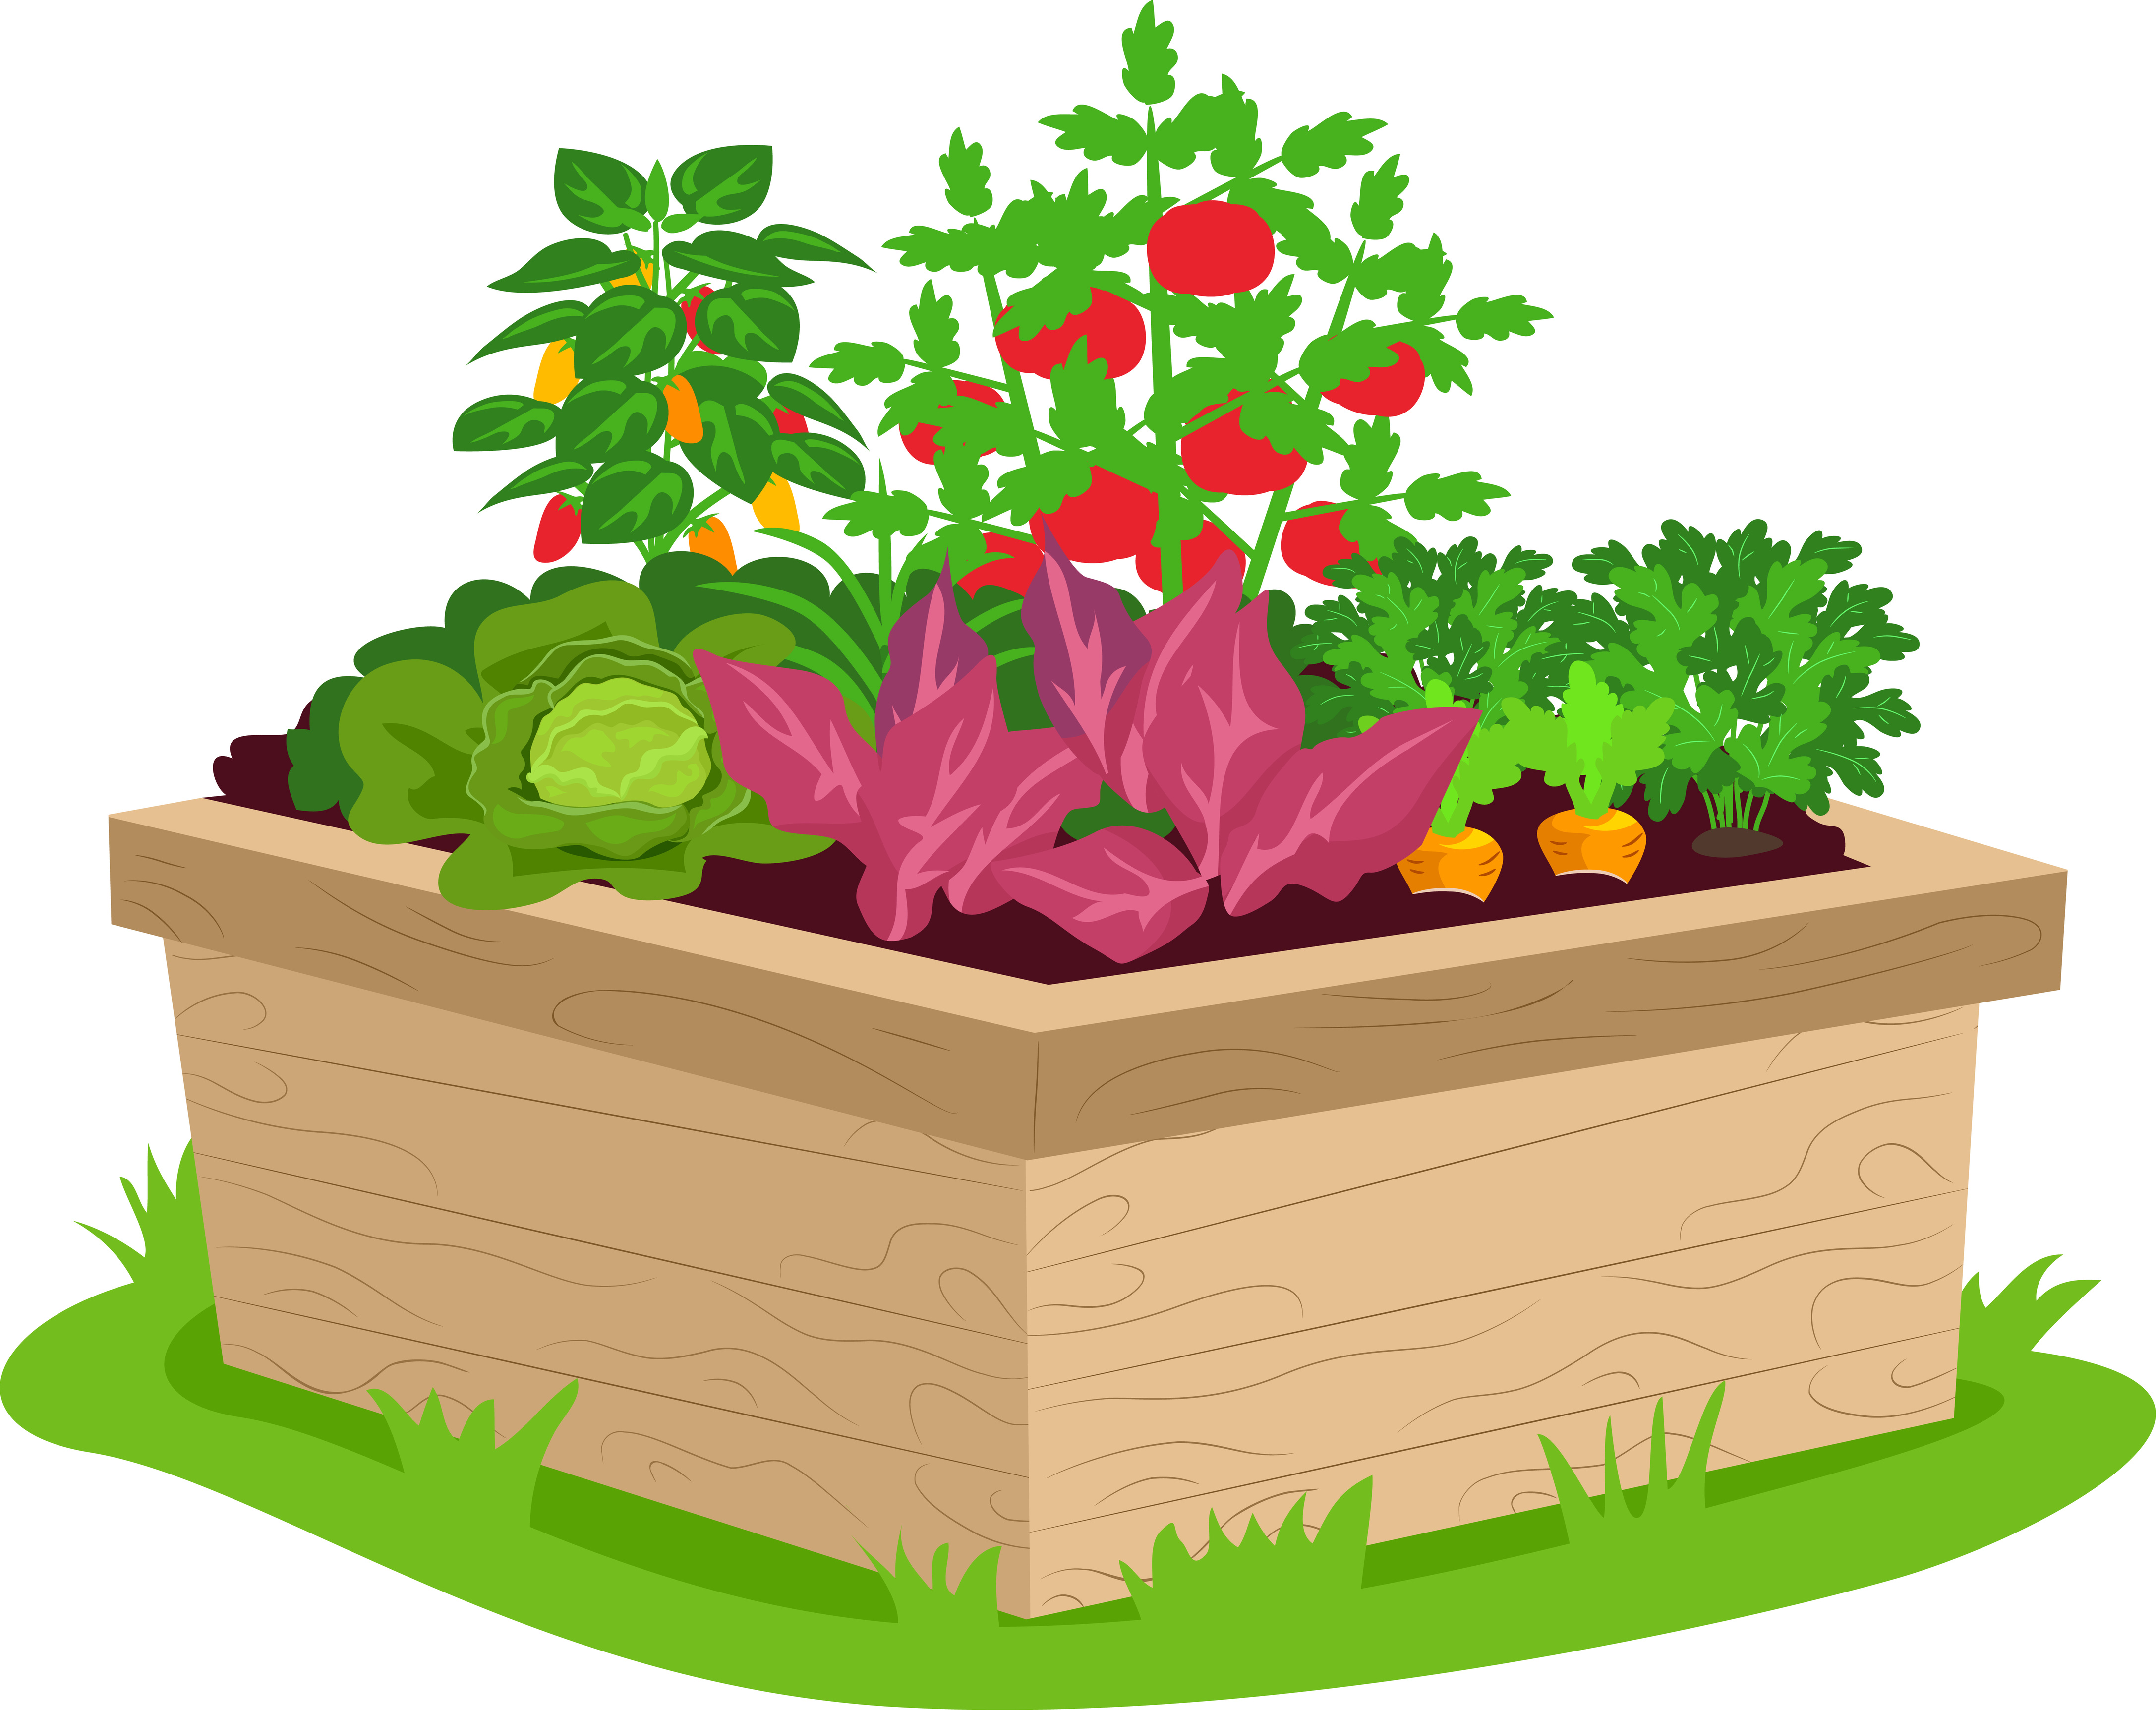 leafy vegetables growing in a container